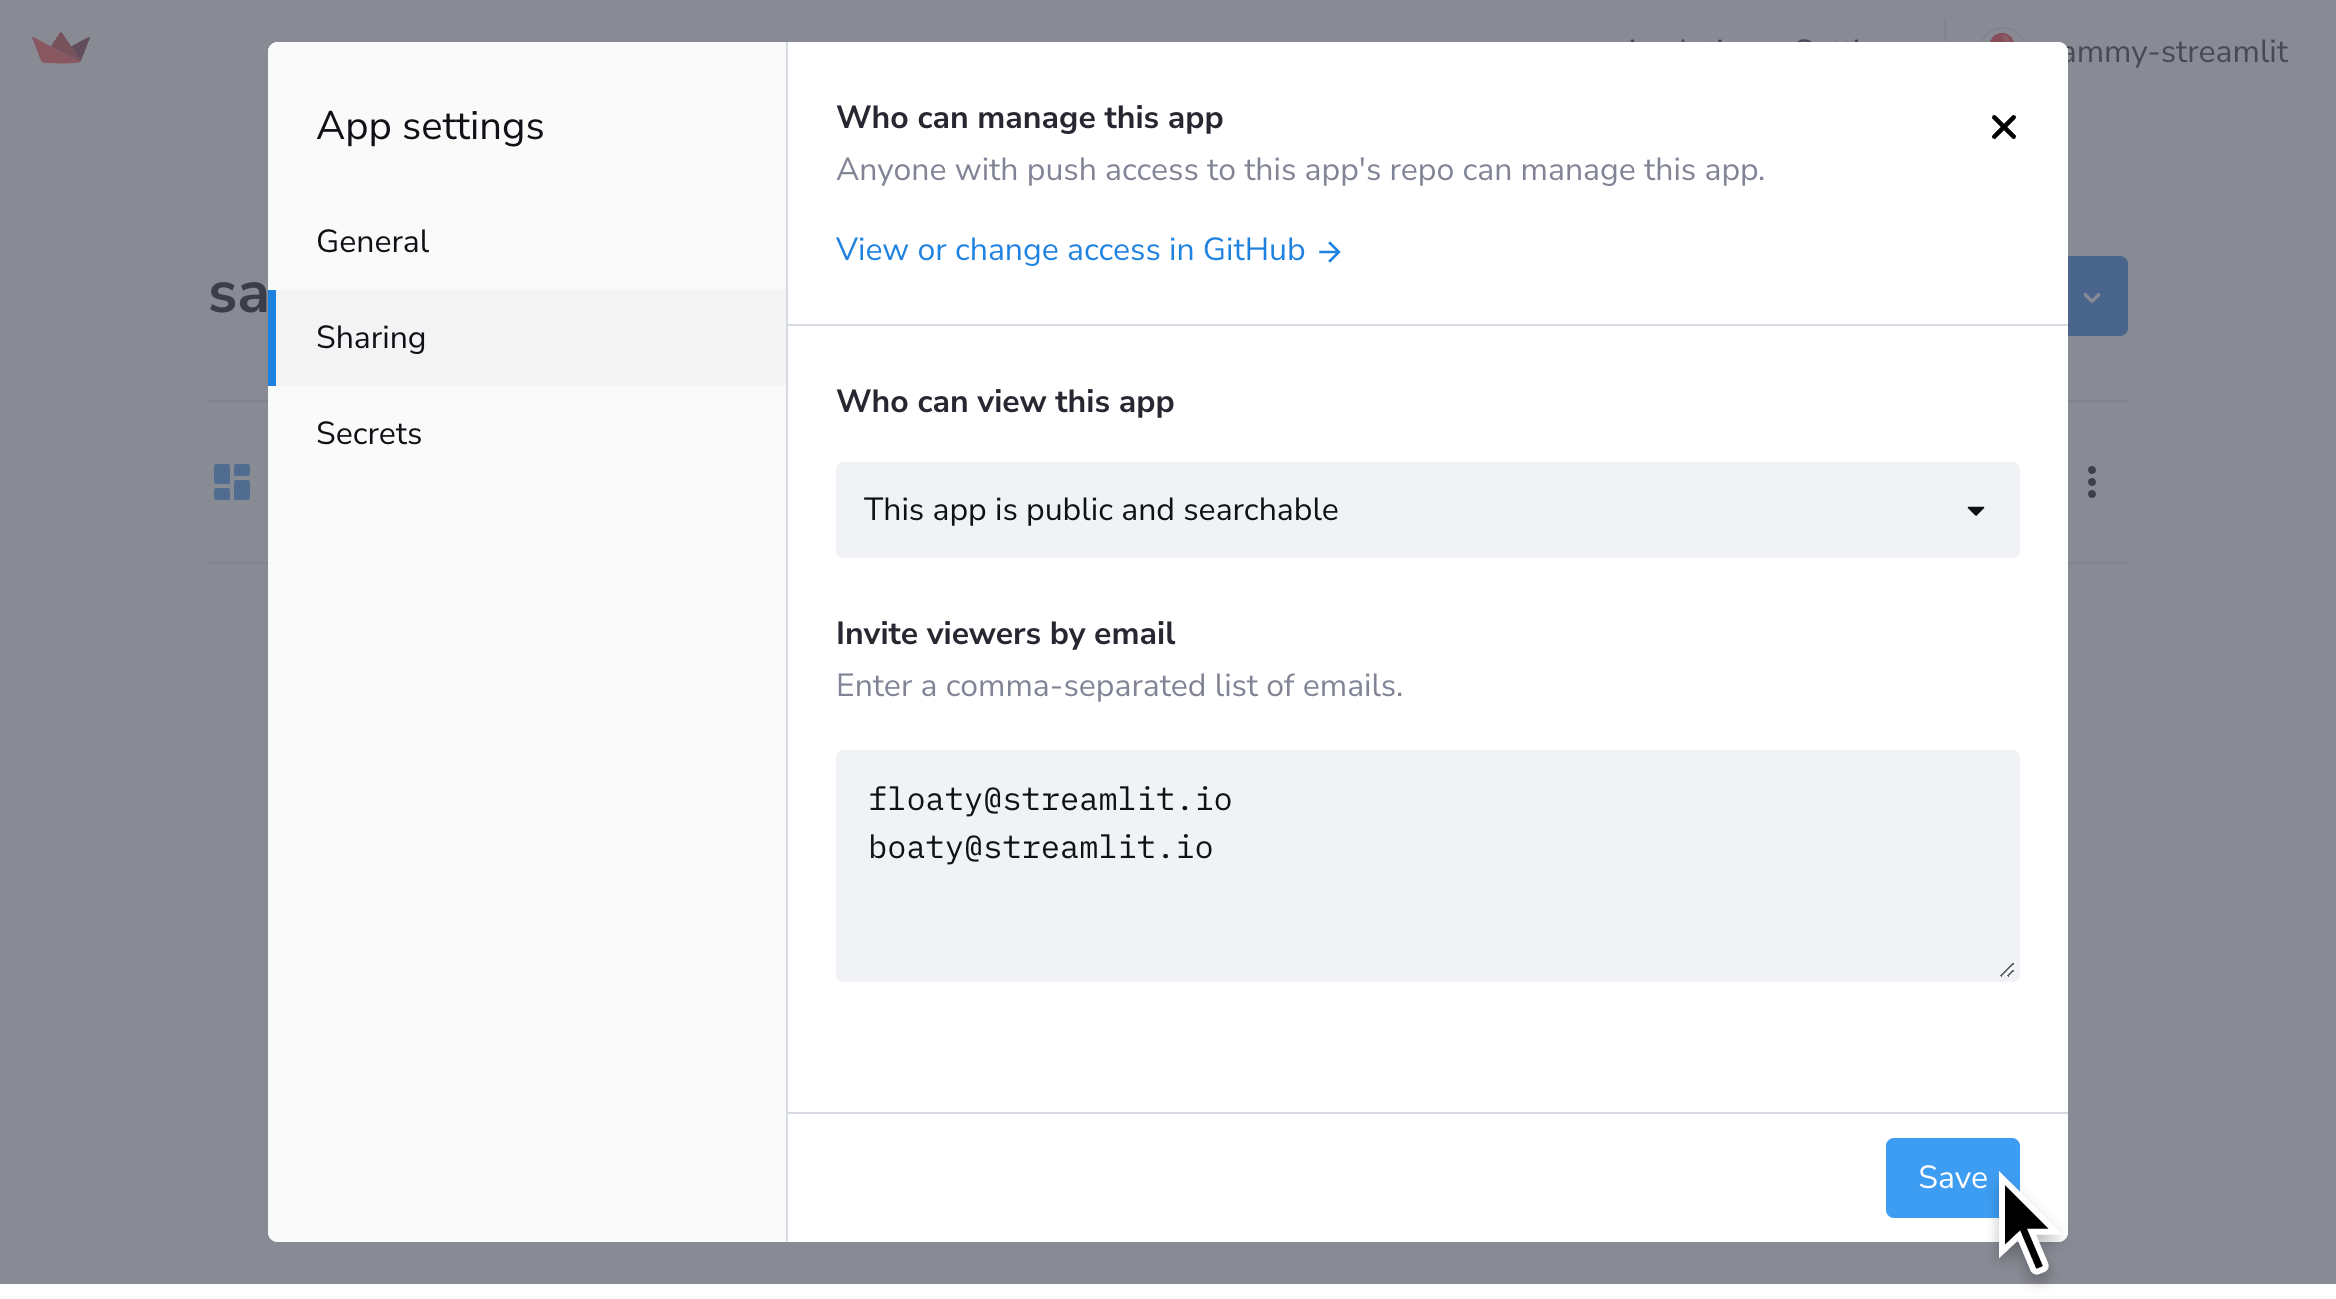 Invite and remove viewers from your app settings